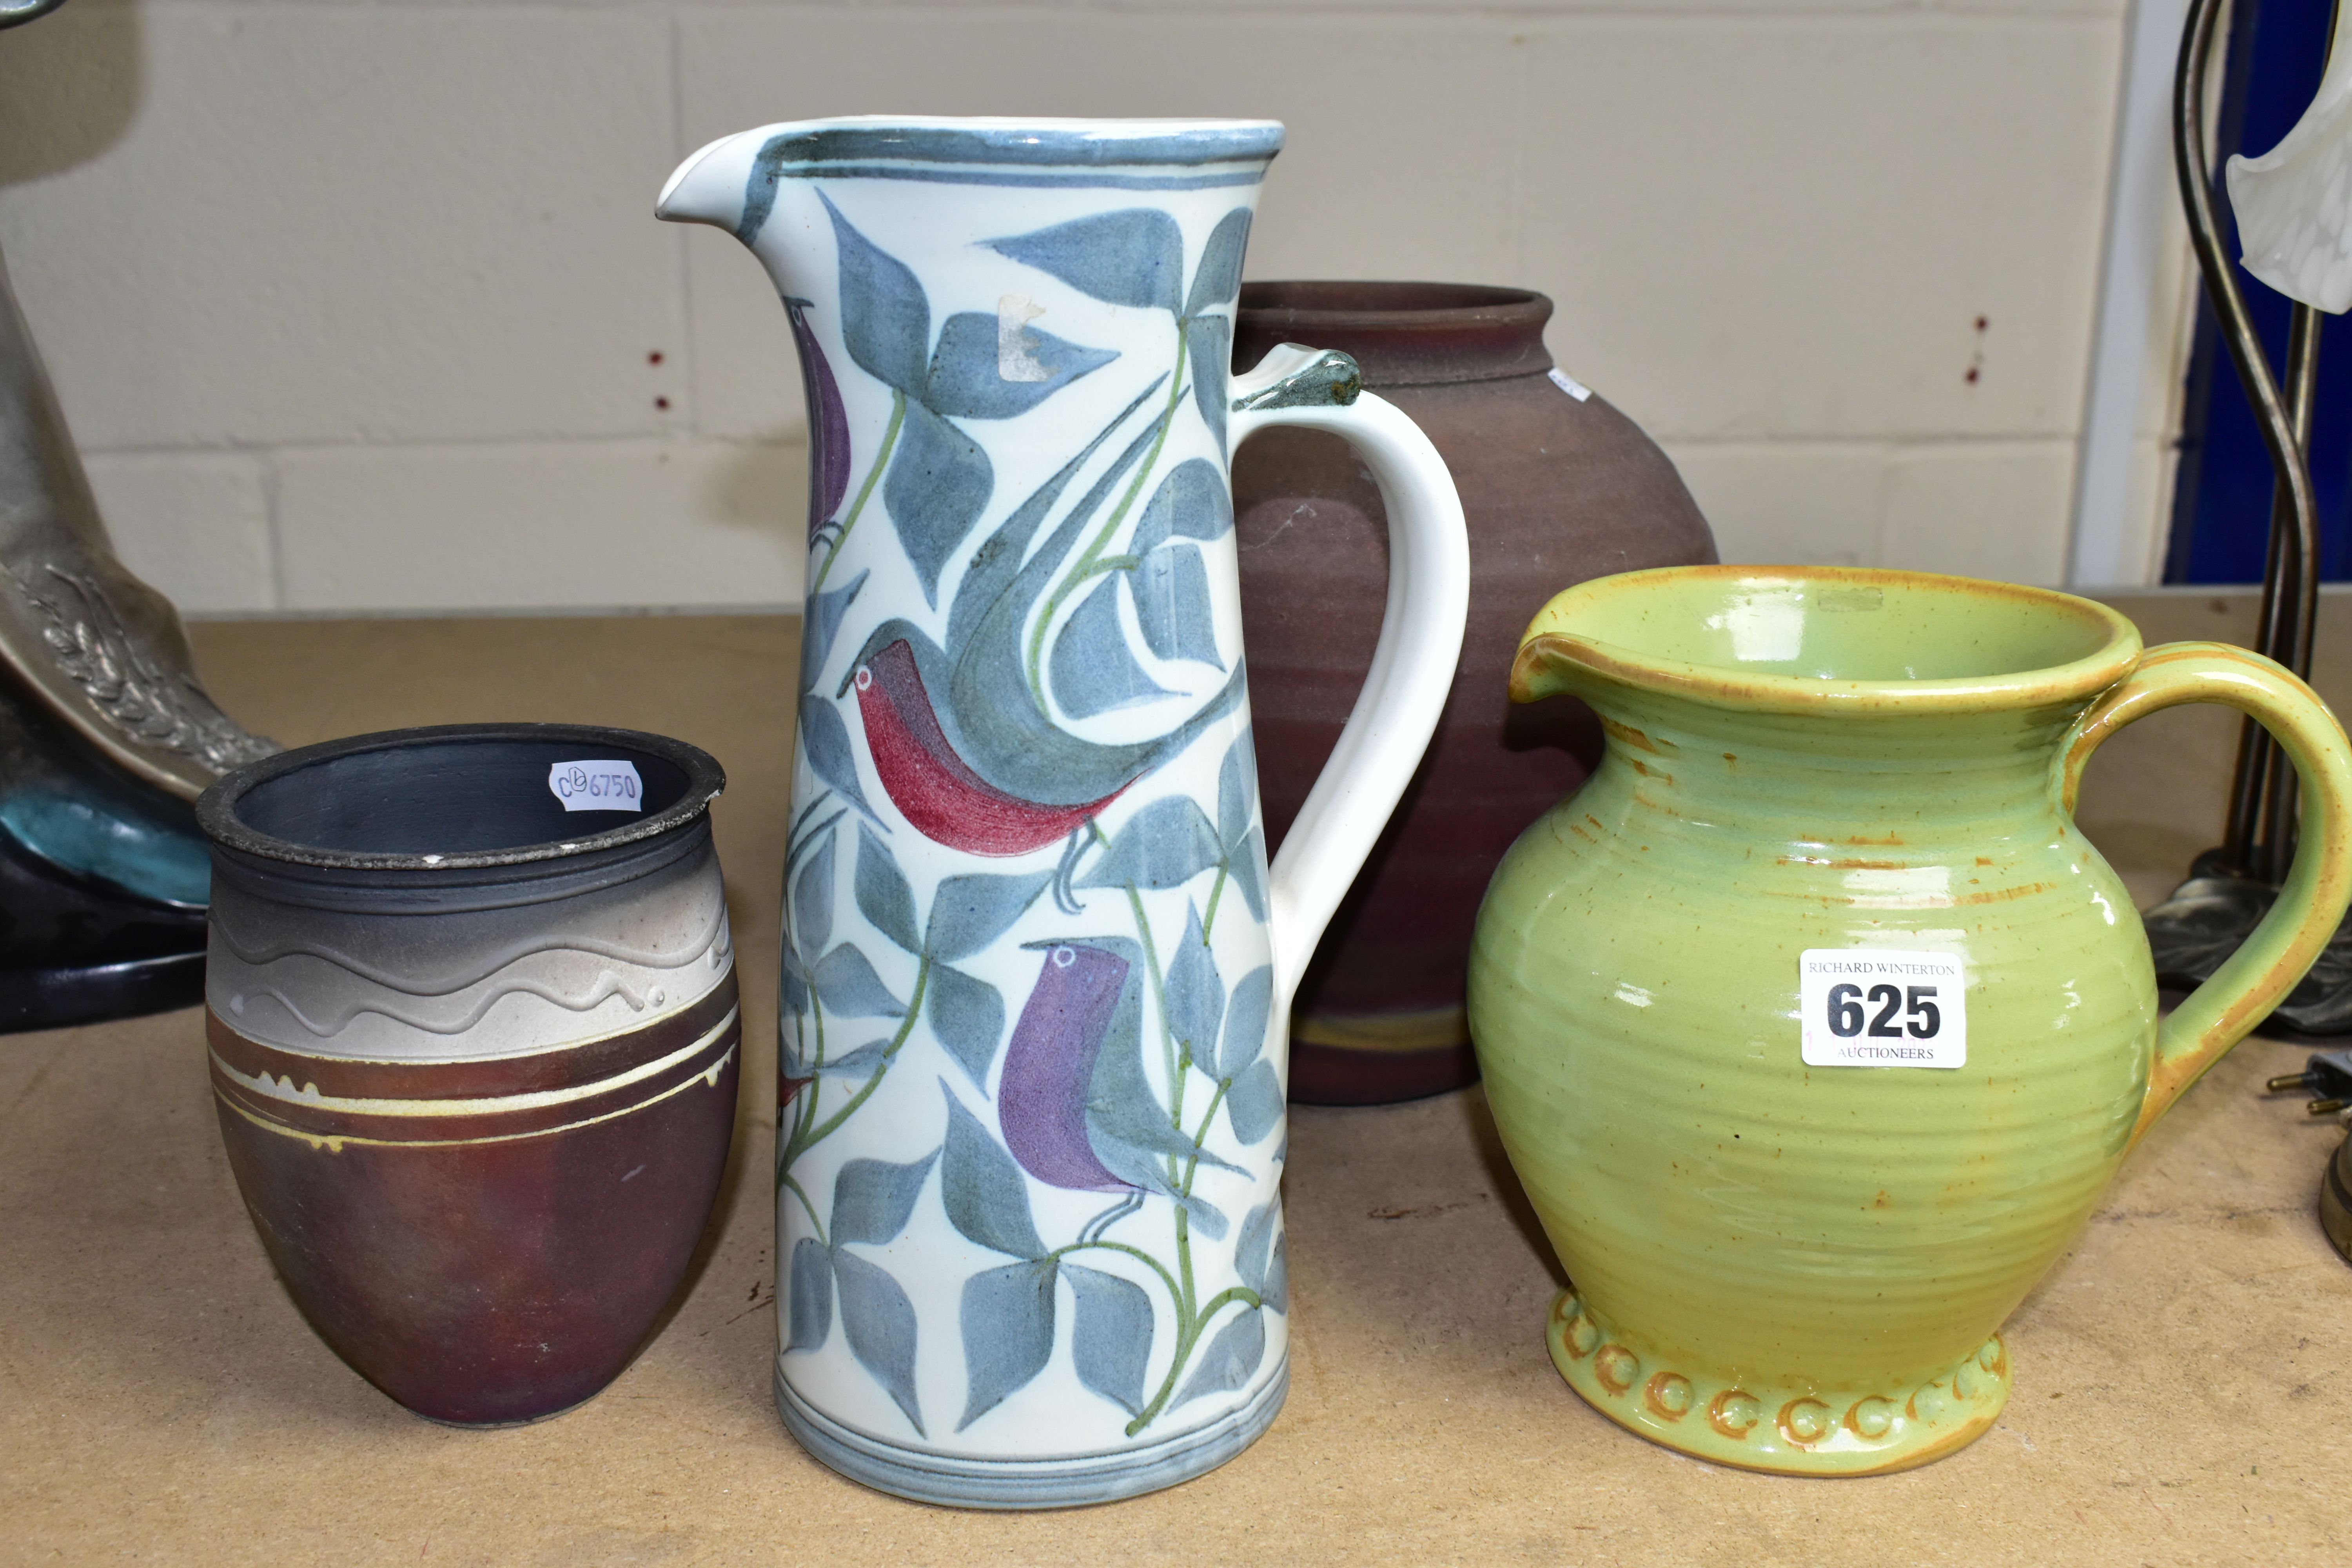 A LAWRENCE MCGOWAN JUG AND OTHER PIECES OF STUDIO POTTERY, four pieces comprising a tall jug painted